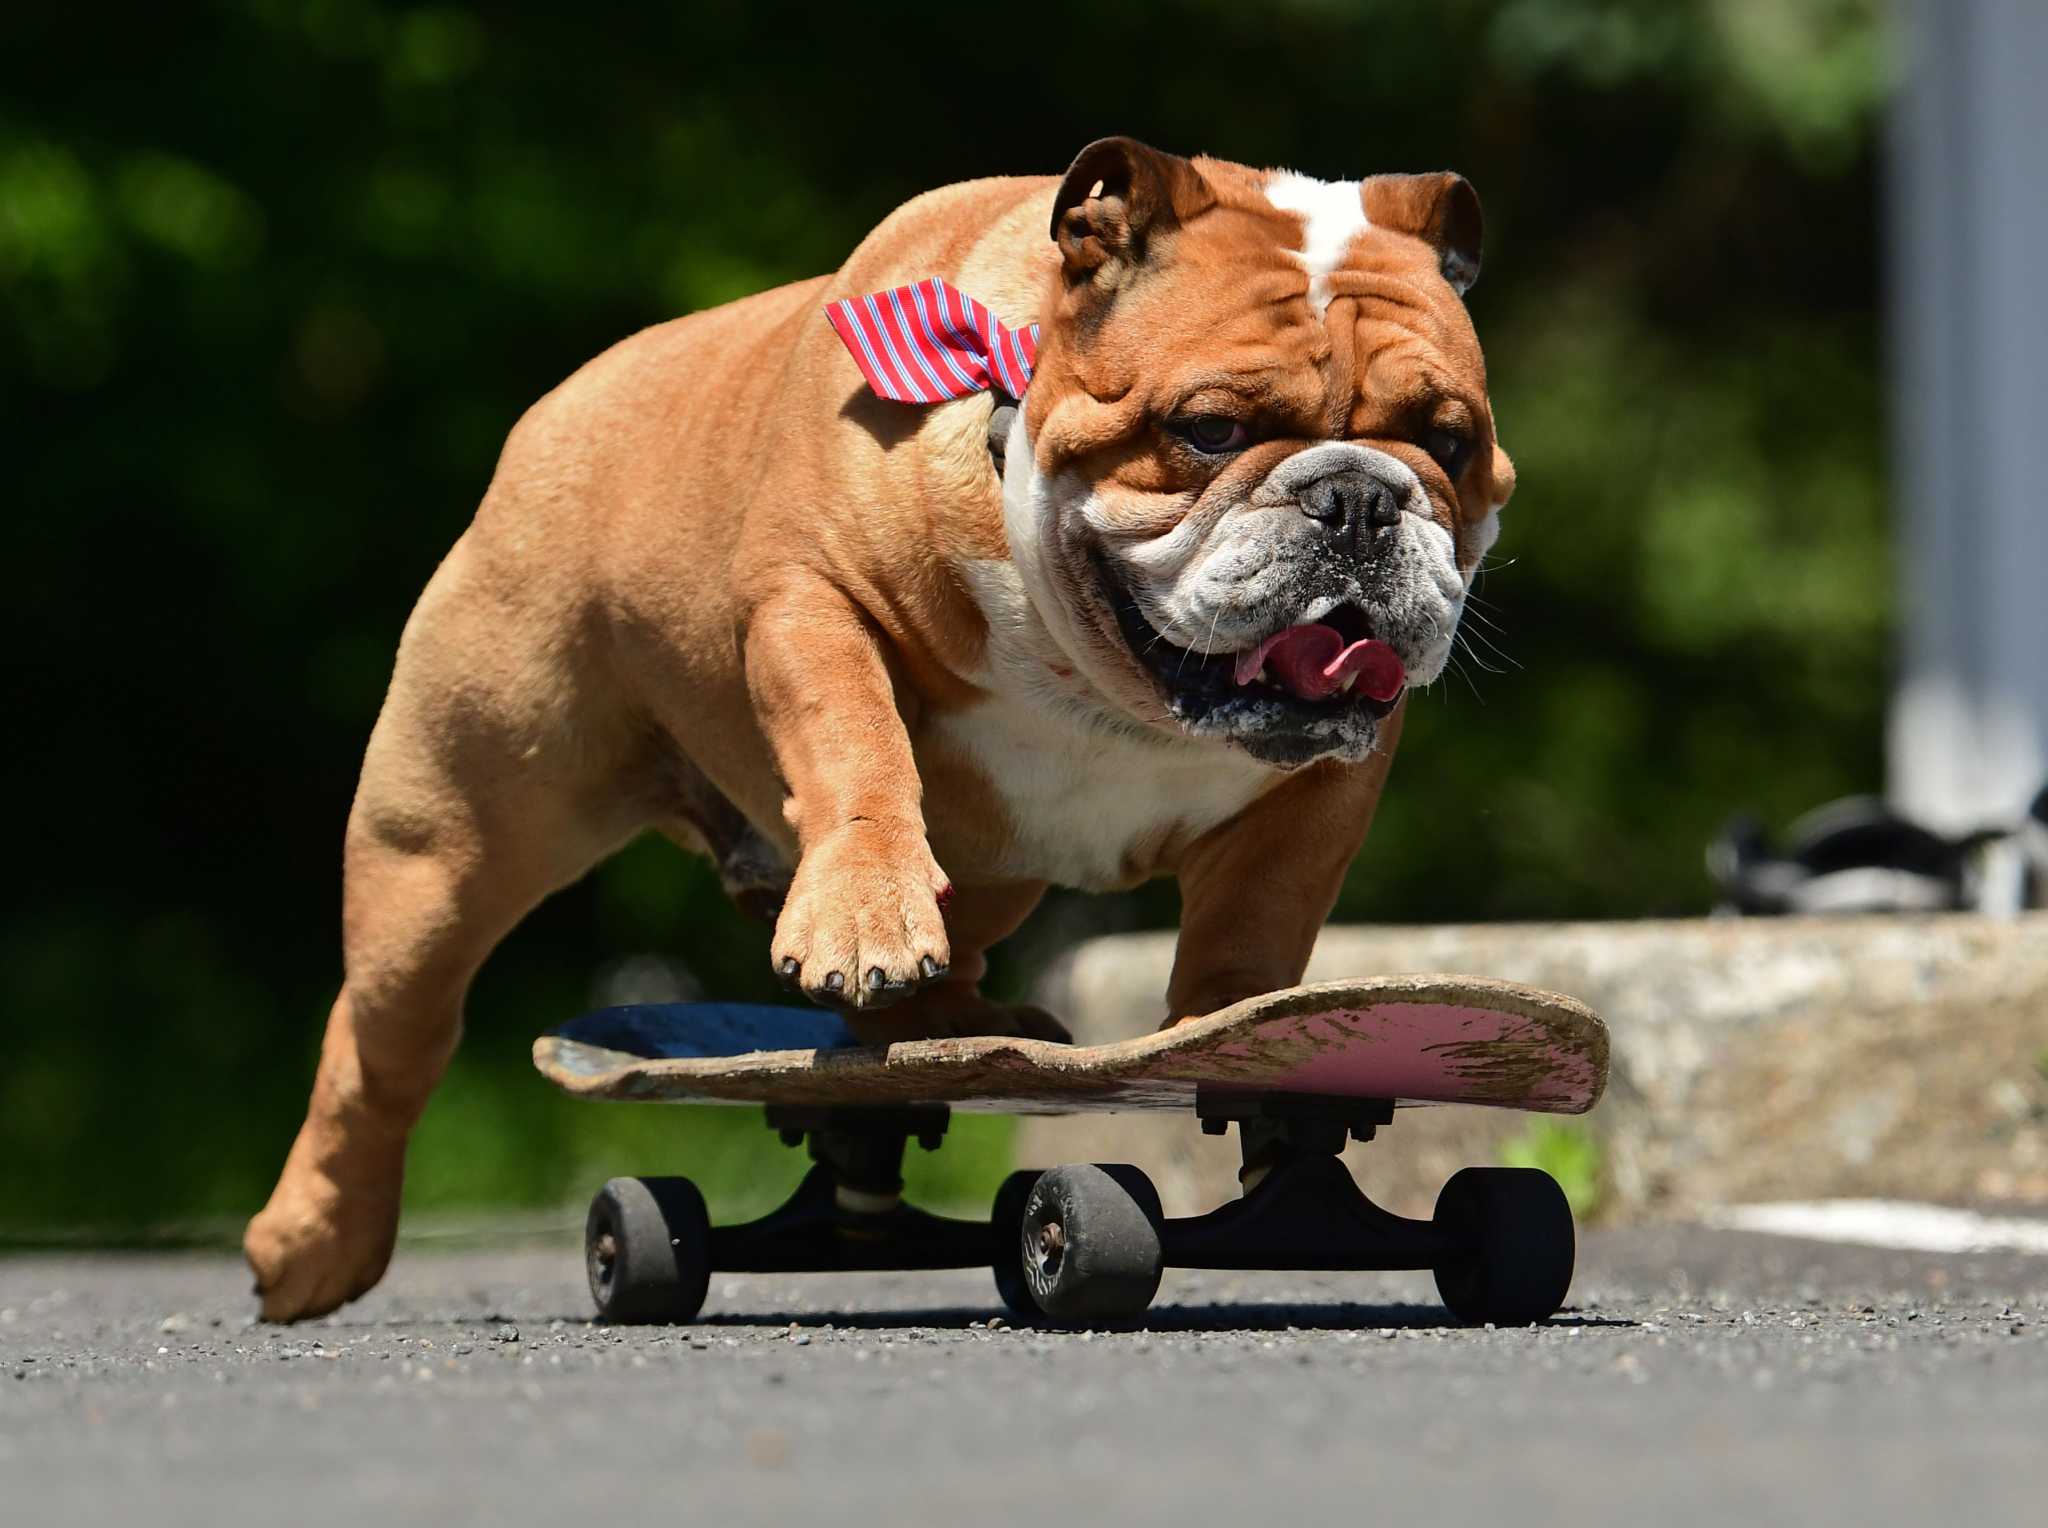 Meet Bruce, the bulldog from Cohoes